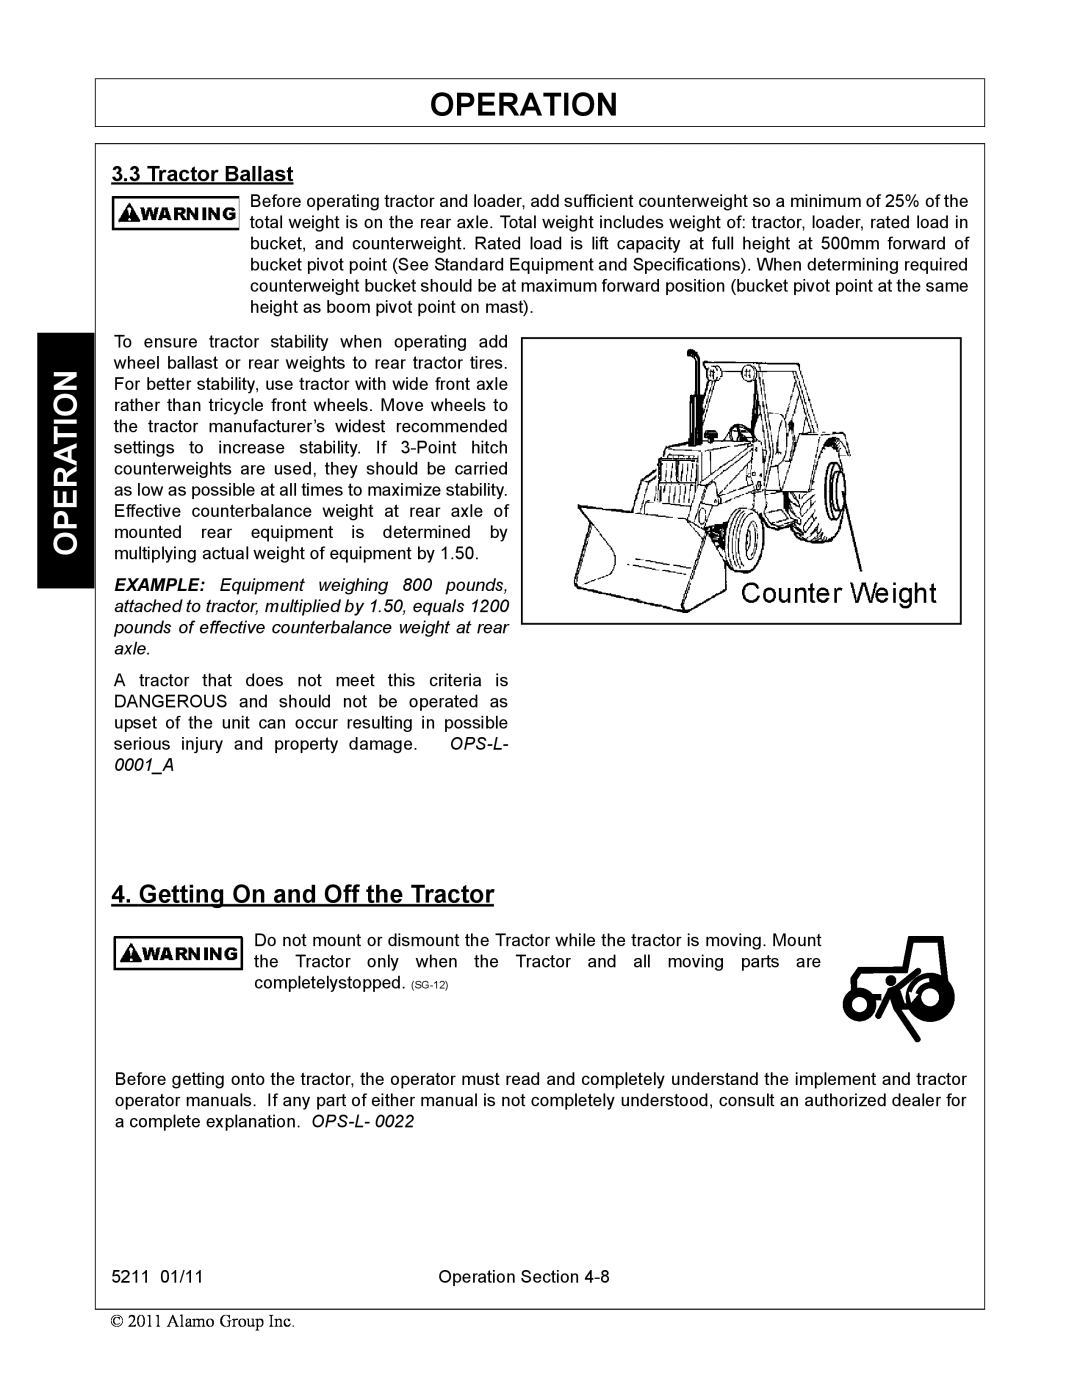 Servis-Rhino 5211 manual Operation, Getting On and Off the Tractor, Tractor Ballast 